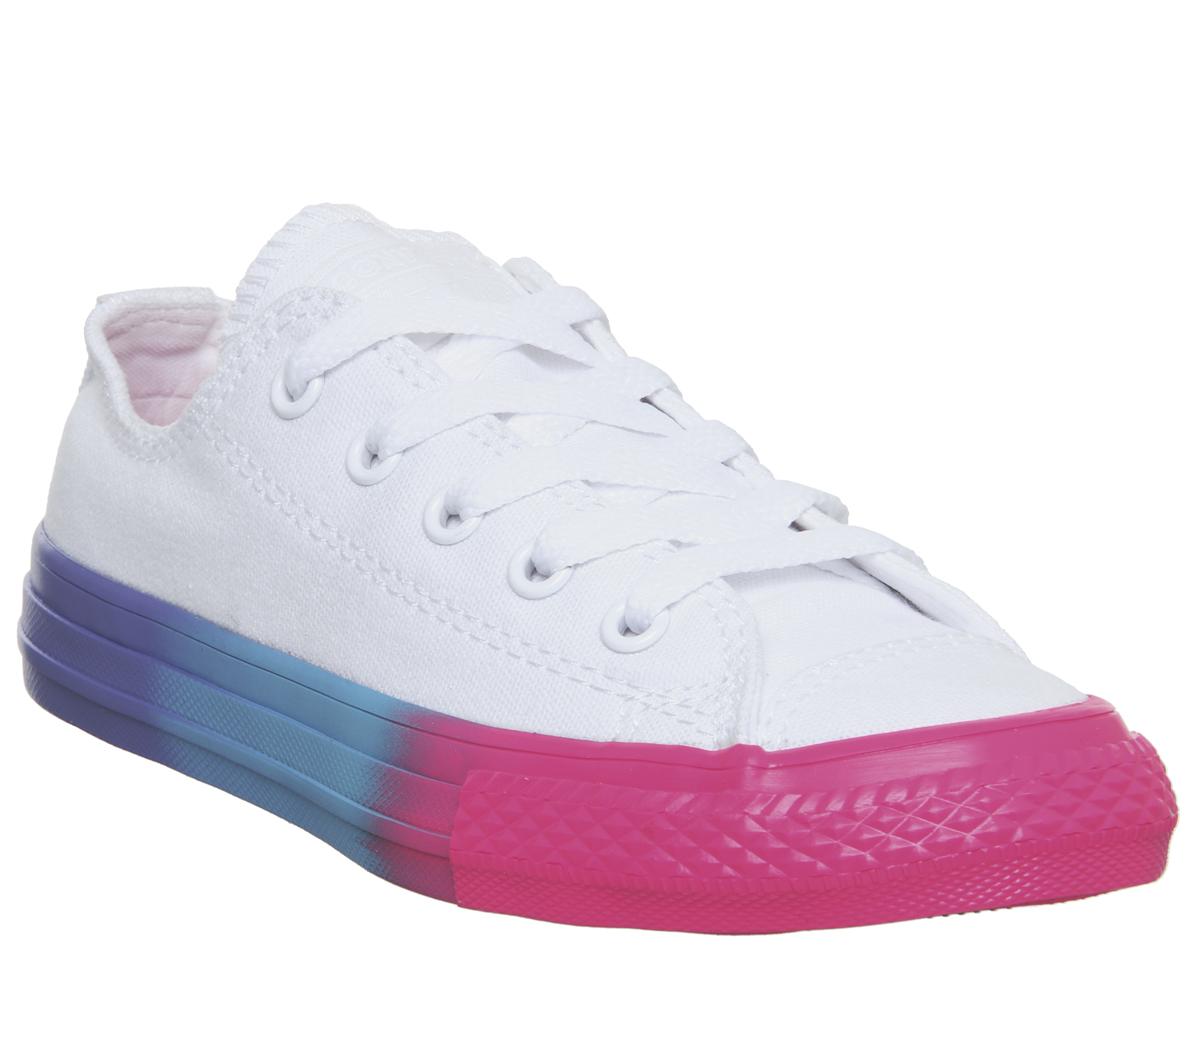 ConverseAll Star Low Youth TrainersWhite Racer Pink Black